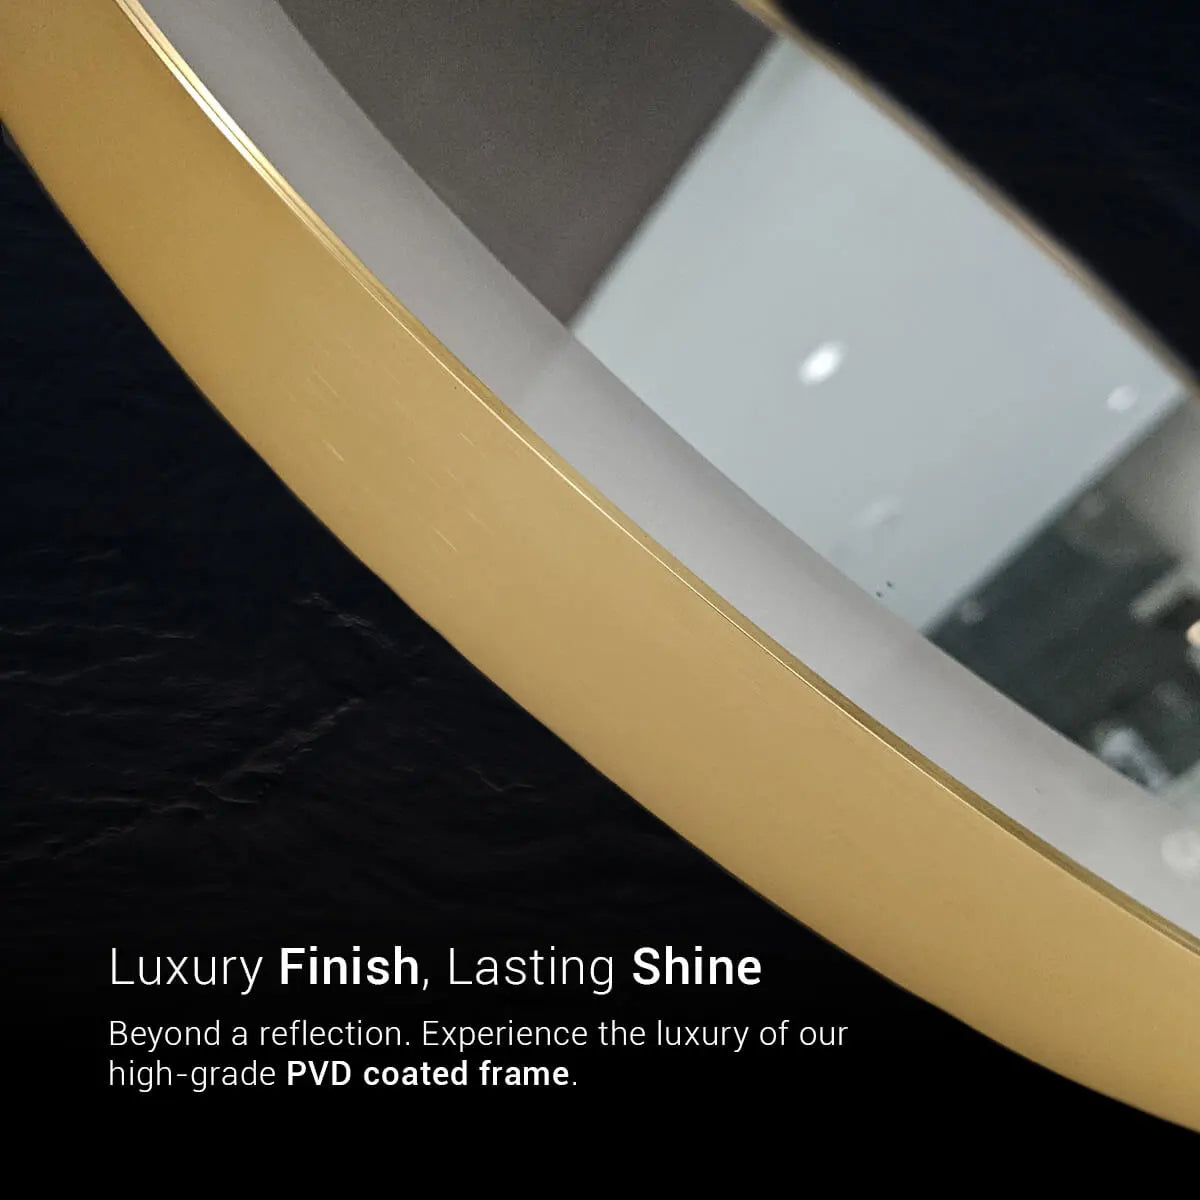 A lighted bathroom mirror featuring a round shape, a golden frame, built-in bright white LED light. This mirror is wall-mounted and features a touch sensor for easy on/off control. Text overlay says "Glazonoid: Luxury Finish, Lasting Shine. PVD coated frame for a touch of luxury that lasts."